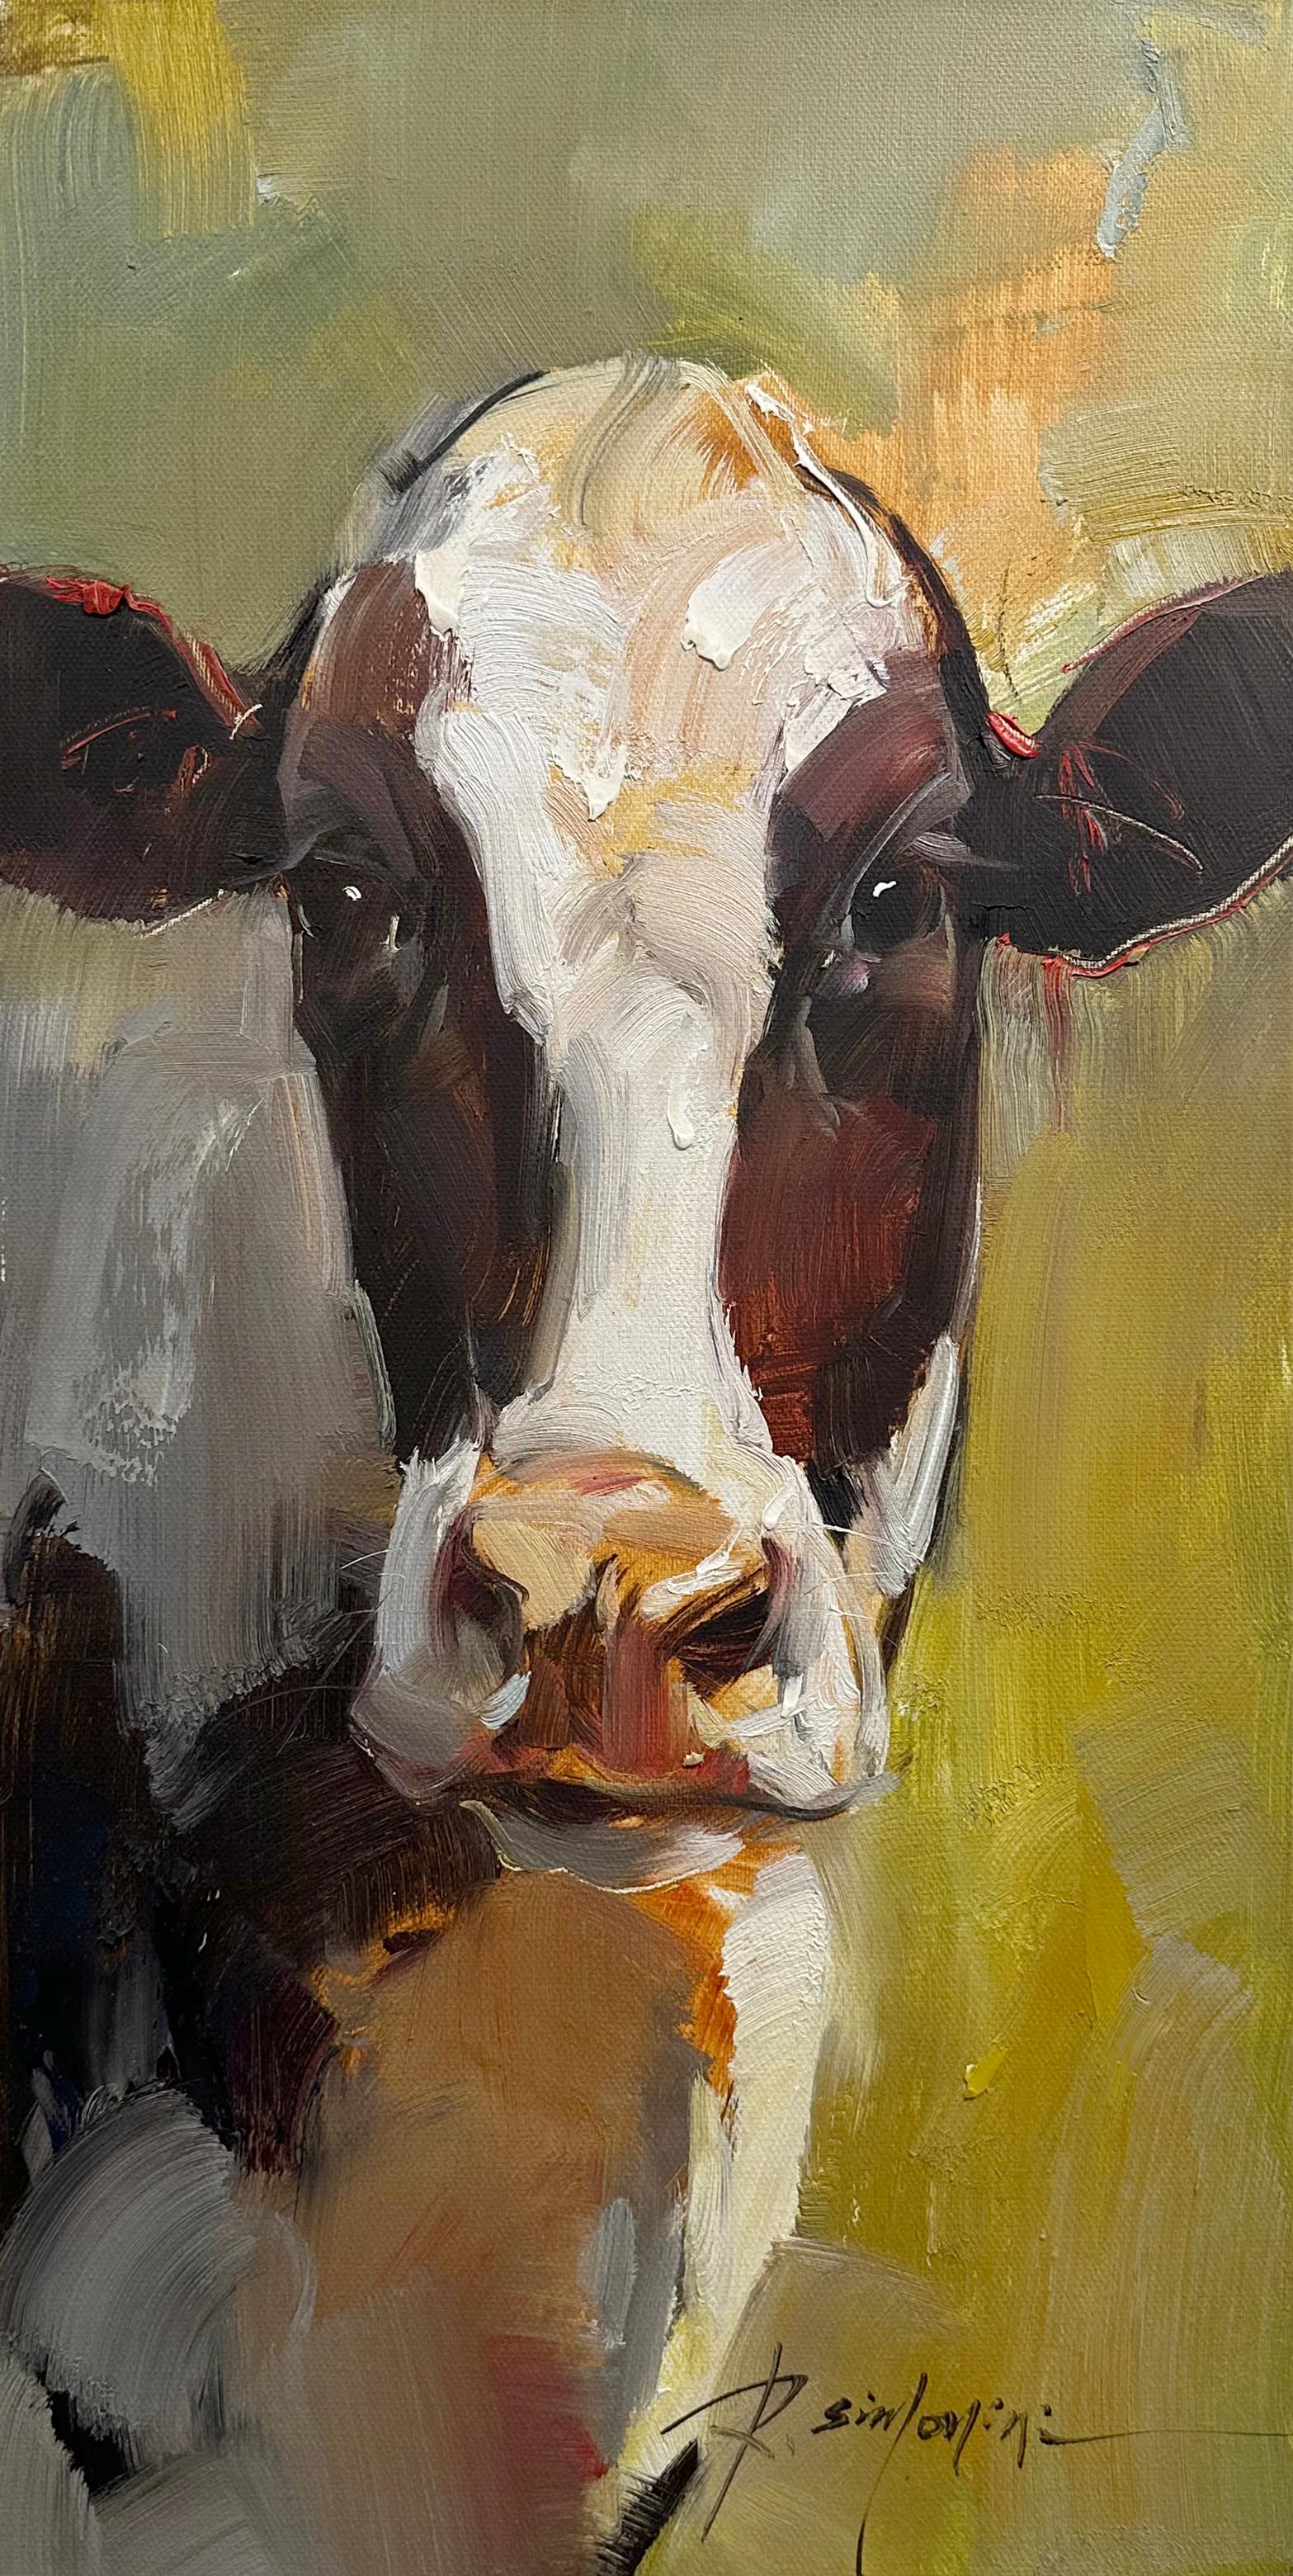 This painting by artist Ray Simonini titled "Sandy" is a 24x12 oil painting on canvas featuring a portrait of a brown and white cow standing in pose in a lush green pasture. 

About the artist:
Simonini was born in China in 1981. He became intrigued